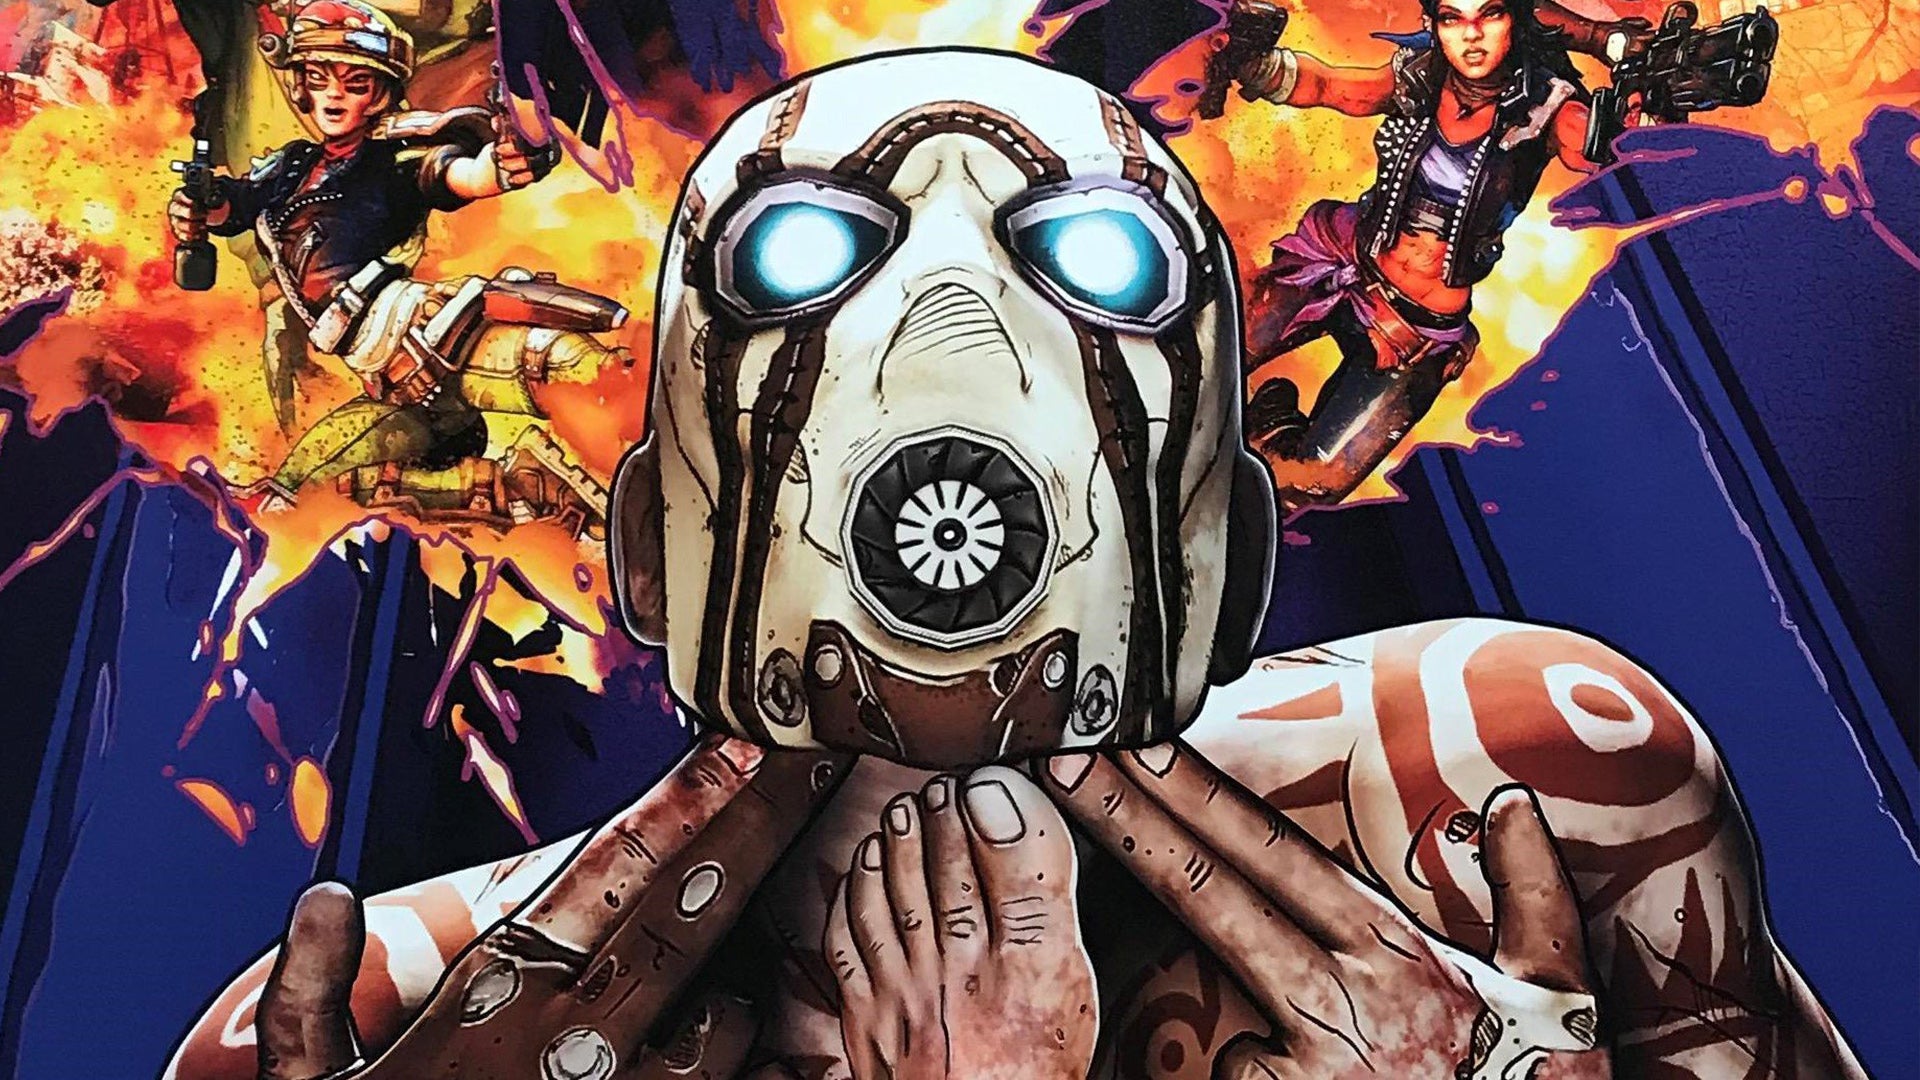 Image for Borderlands 3: PS4 vs Xbox One Performance Tested! Better Optimised Than PS4 Pro?